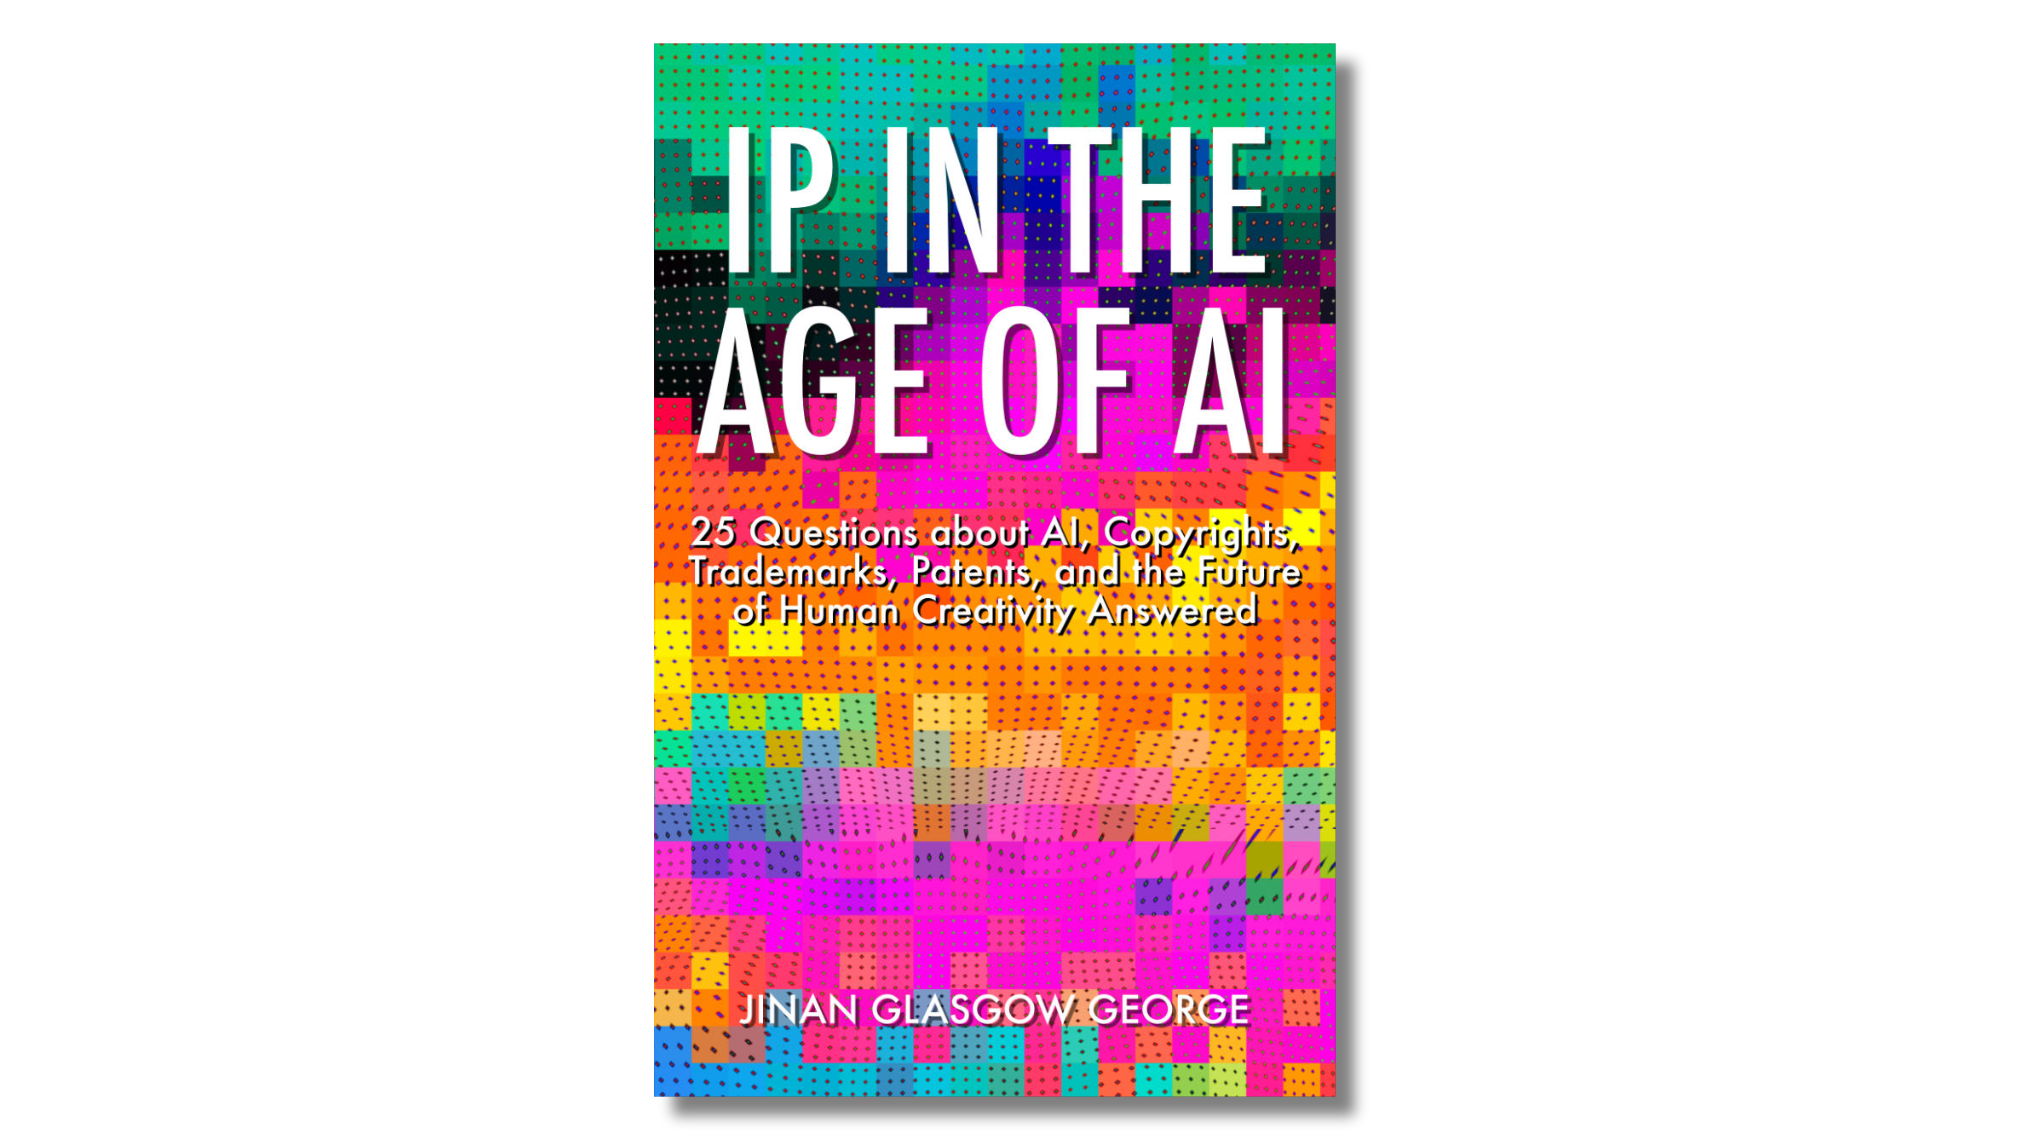 JiNan Glasgow George, CEO of NEO IP, releases her 2nd book – “IP in the Age of AI” now available for purchase on Amazon